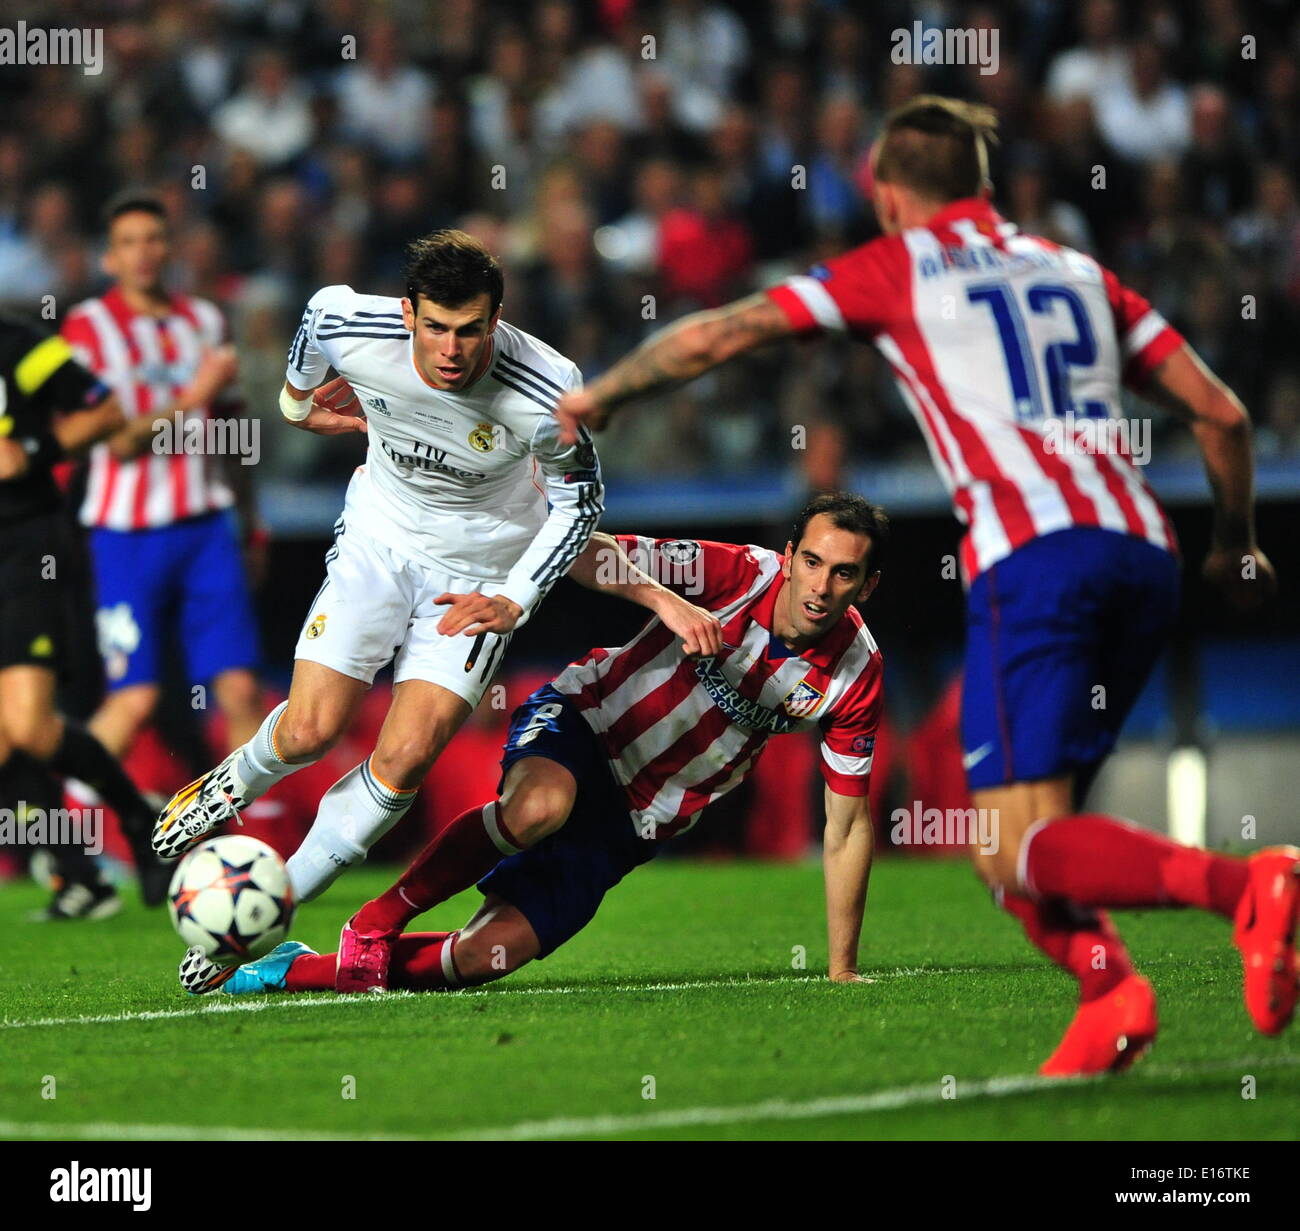 Lisbon, Portugal. 24th May, 2014. Real Madrid's Gareth Bale (L) breaks  through during the UEFA Champions League Final Real Madrid vs Atletico de Madrid  at Luz stadium in Lisbon, capital of Portugal,